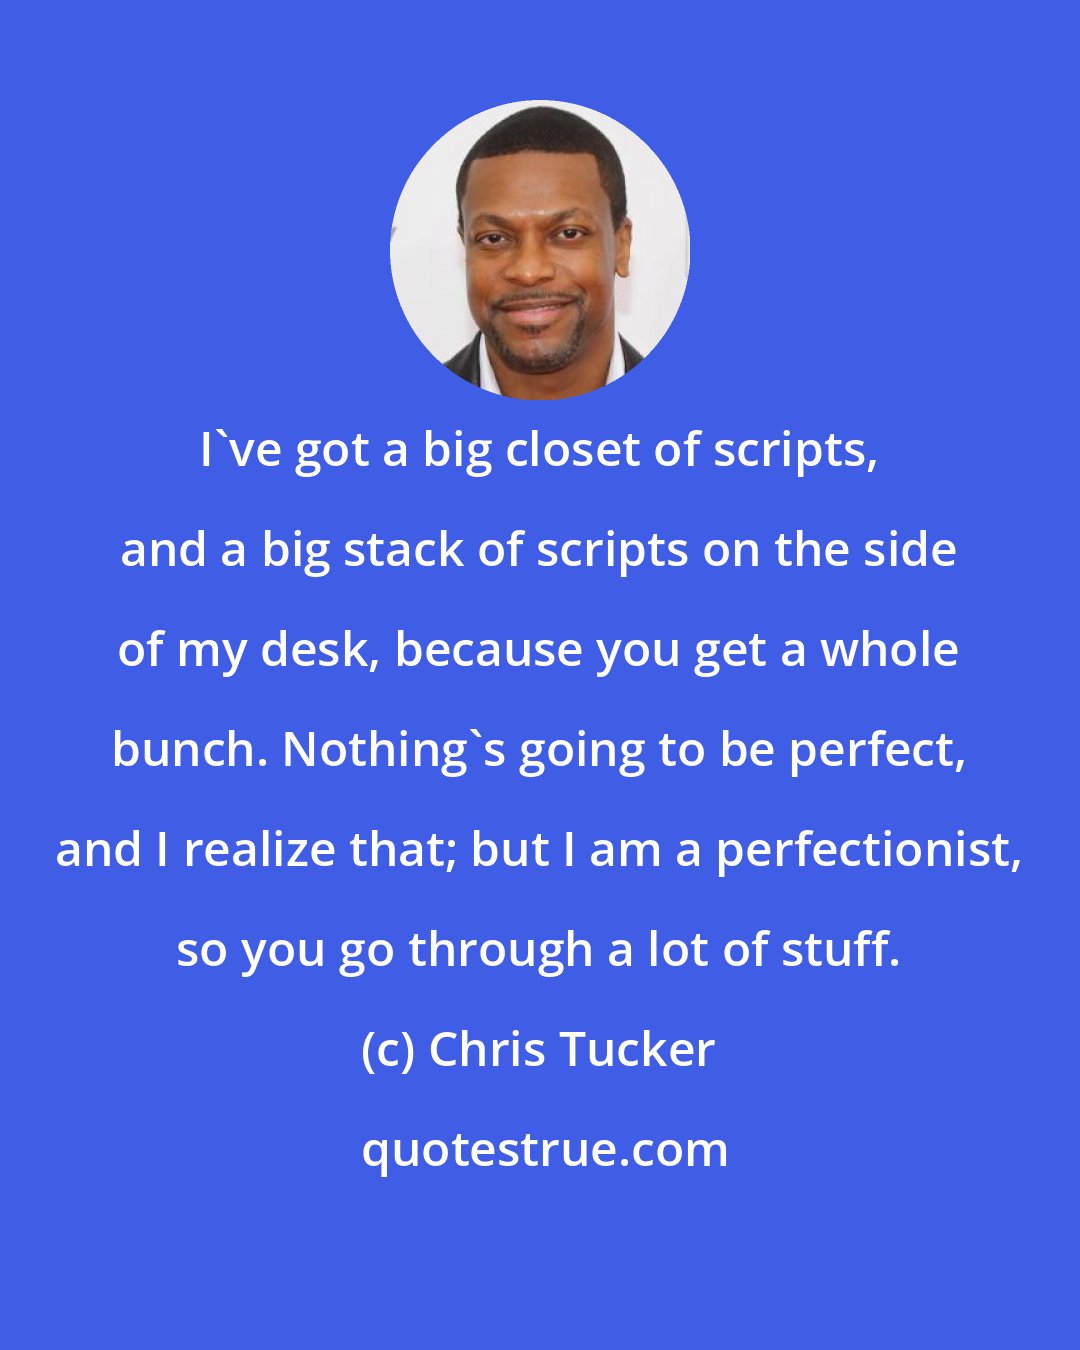 Chris Tucker: I've got a big closet of scripts, and a big stack of scripts on the side of my desk, because you get a whole bunch. Nothing's going to be perfect, and I realize that; but I am a perfectionist, so you go through a lot of stuff.